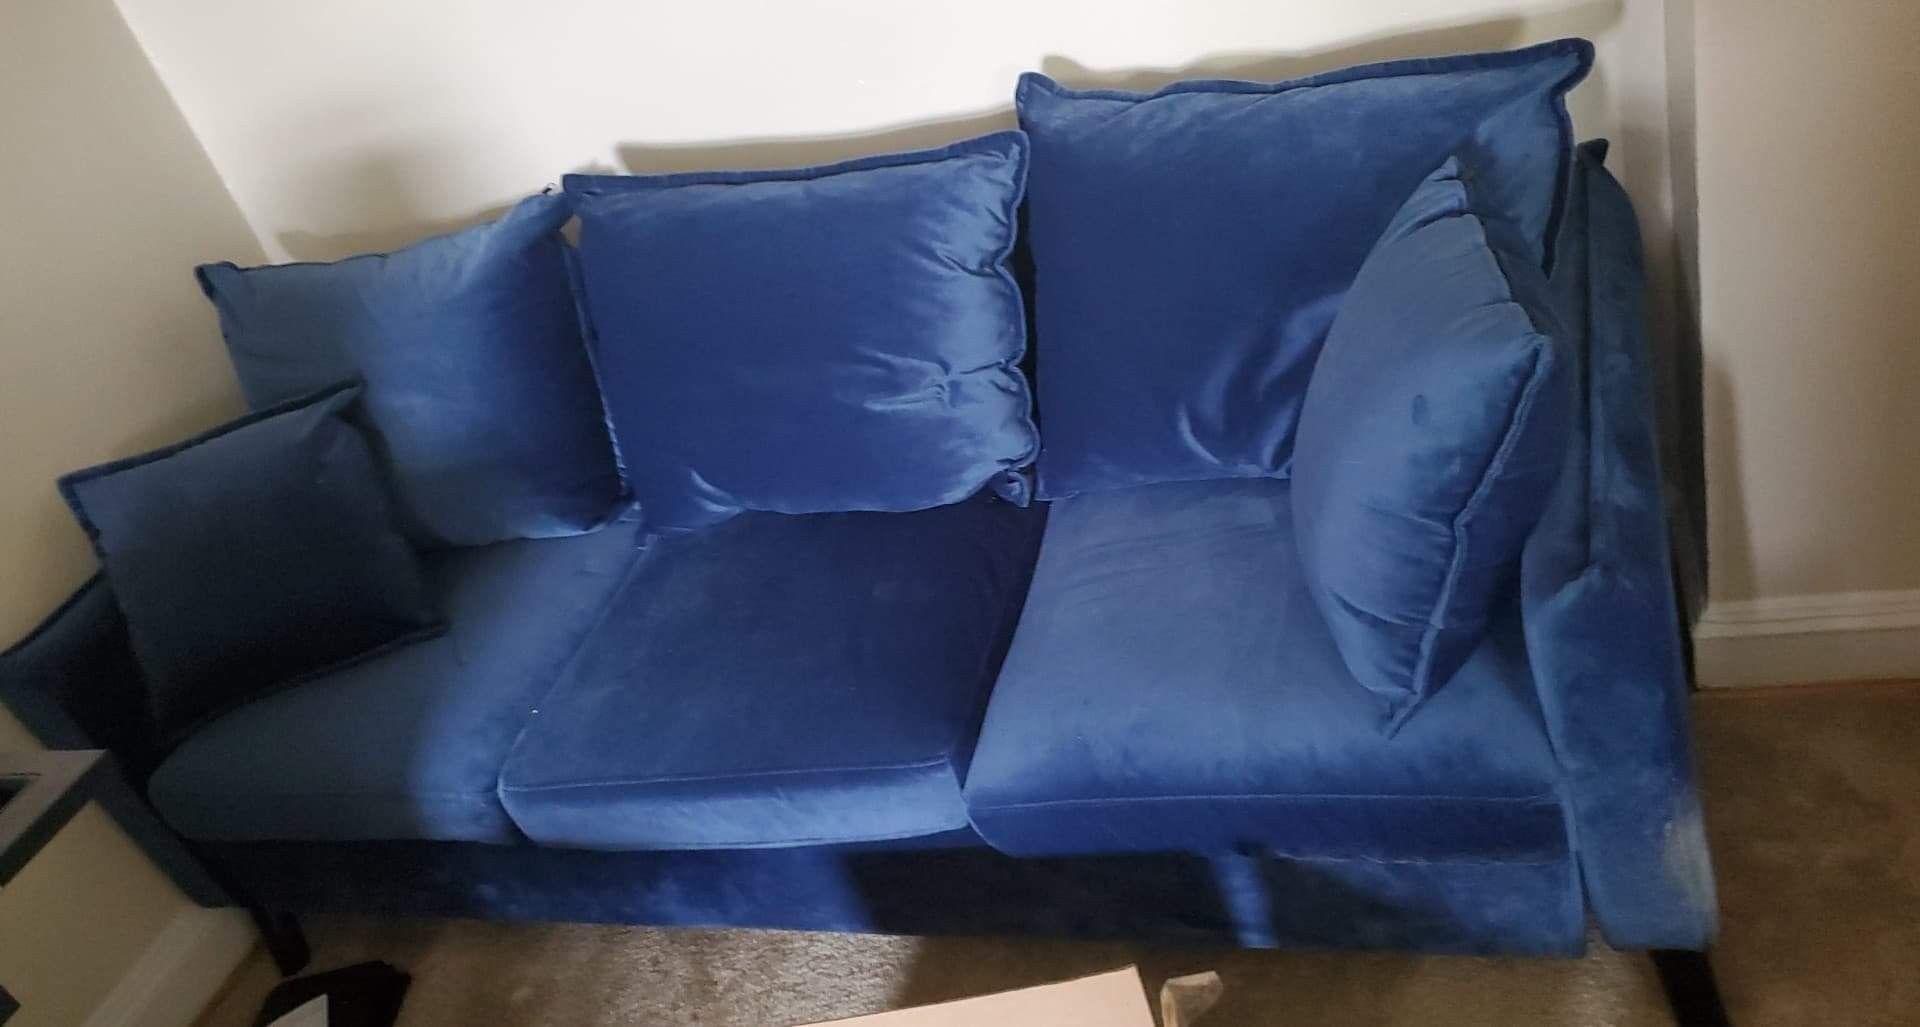 Mint condition couch